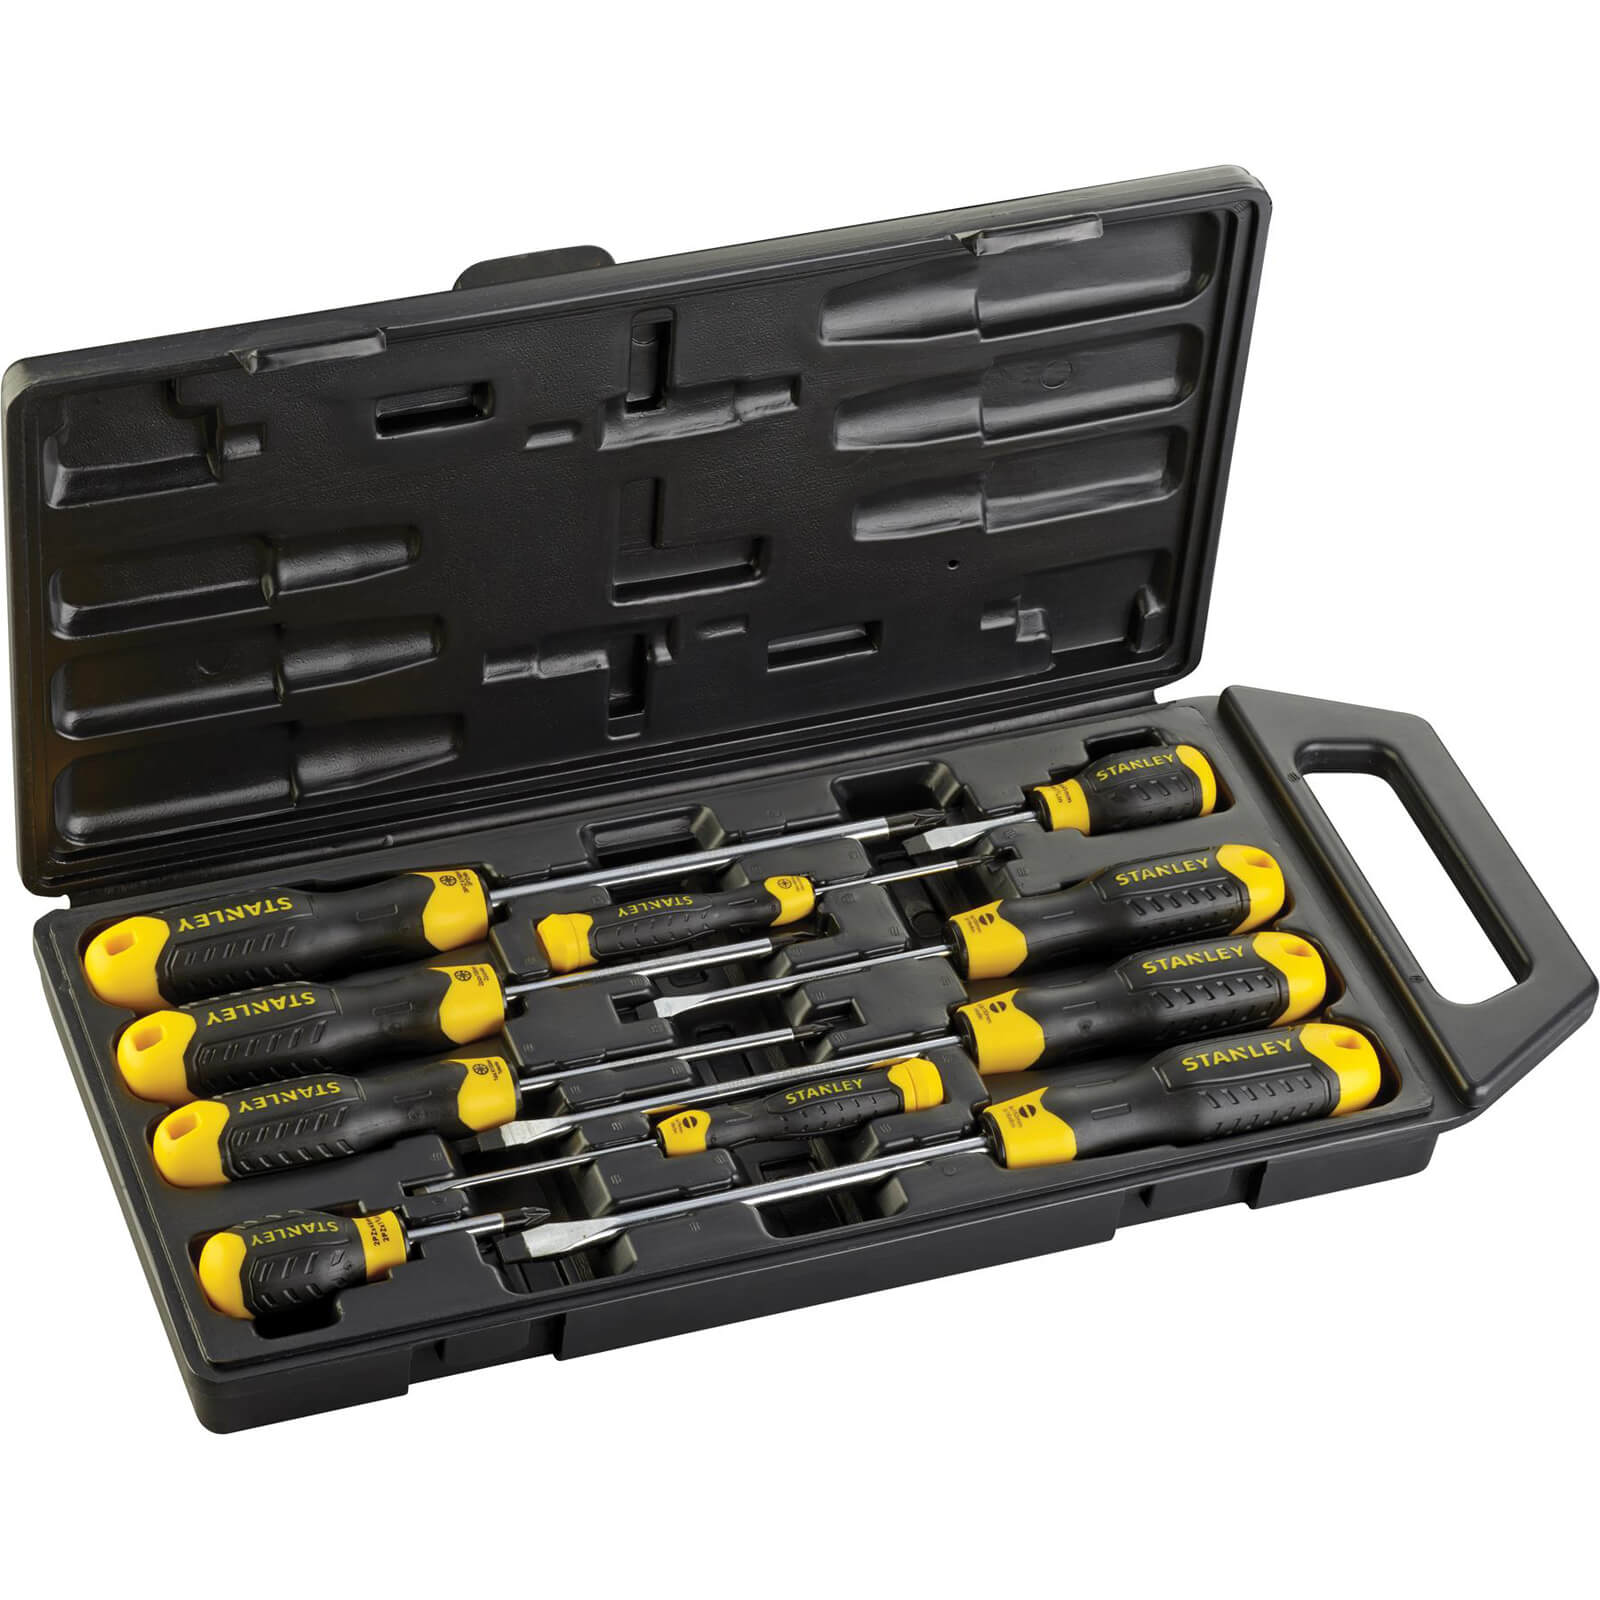 Image of Stanley 10 Piece Cushion Grip Pozi and Slotted Screwdriver Set